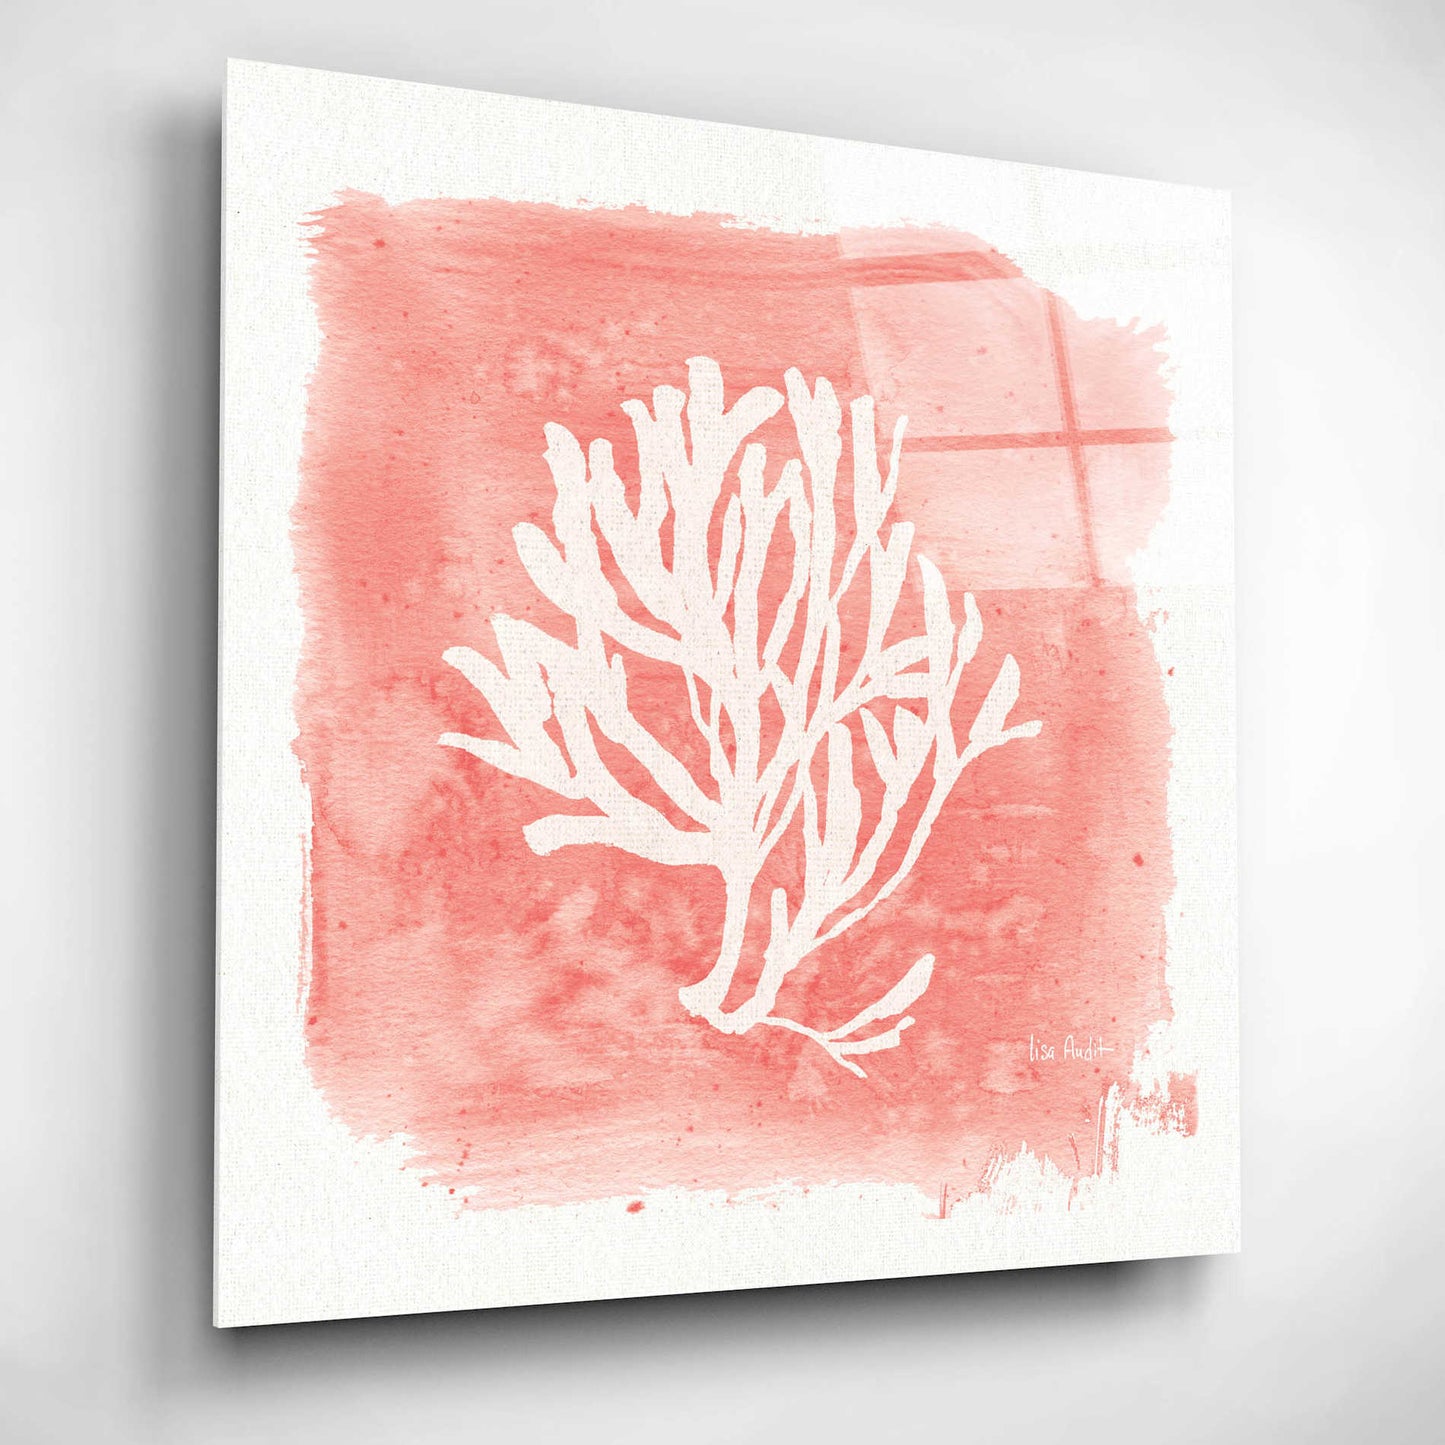 Epic Art 'Water Coral Cove III' by Lisa Audit, Acrylic Glass Wall Art,12x12